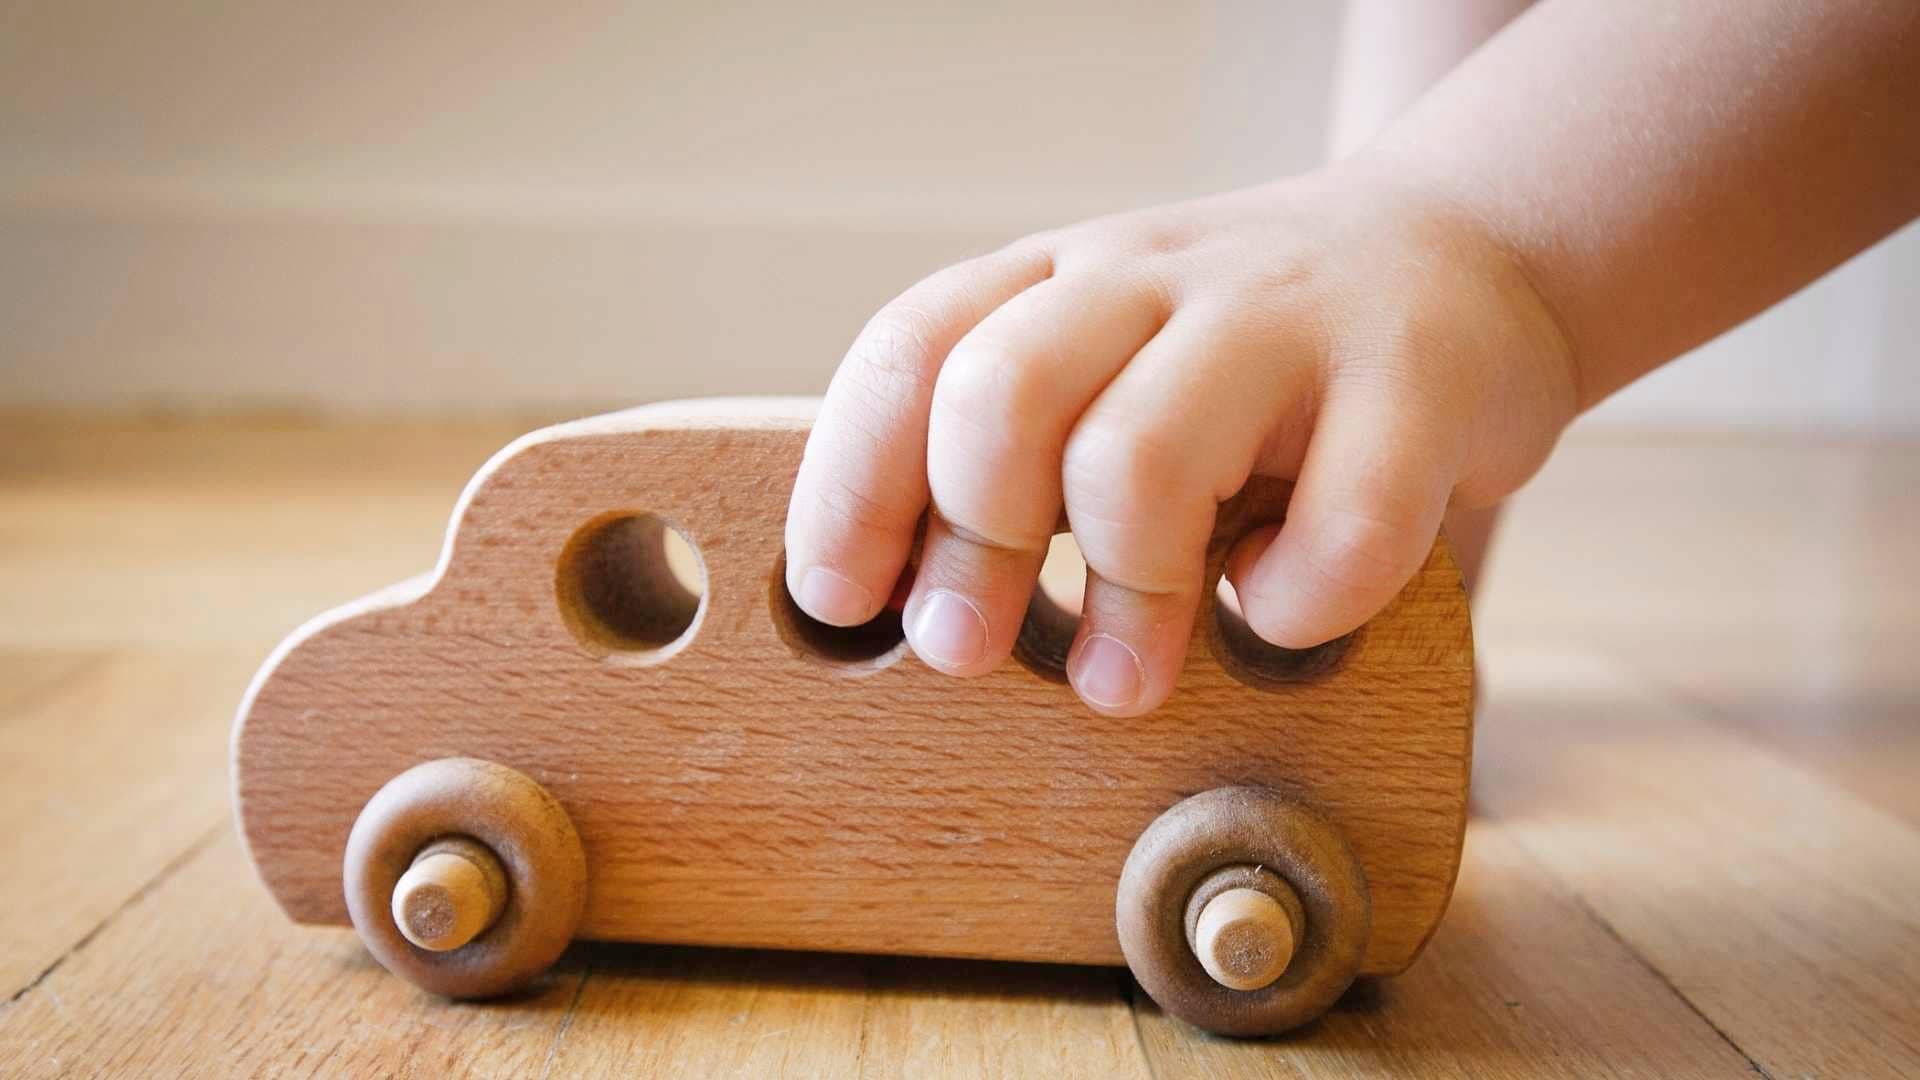 Toddler playing with a secondhand wooden car toy on the floor of the living room.